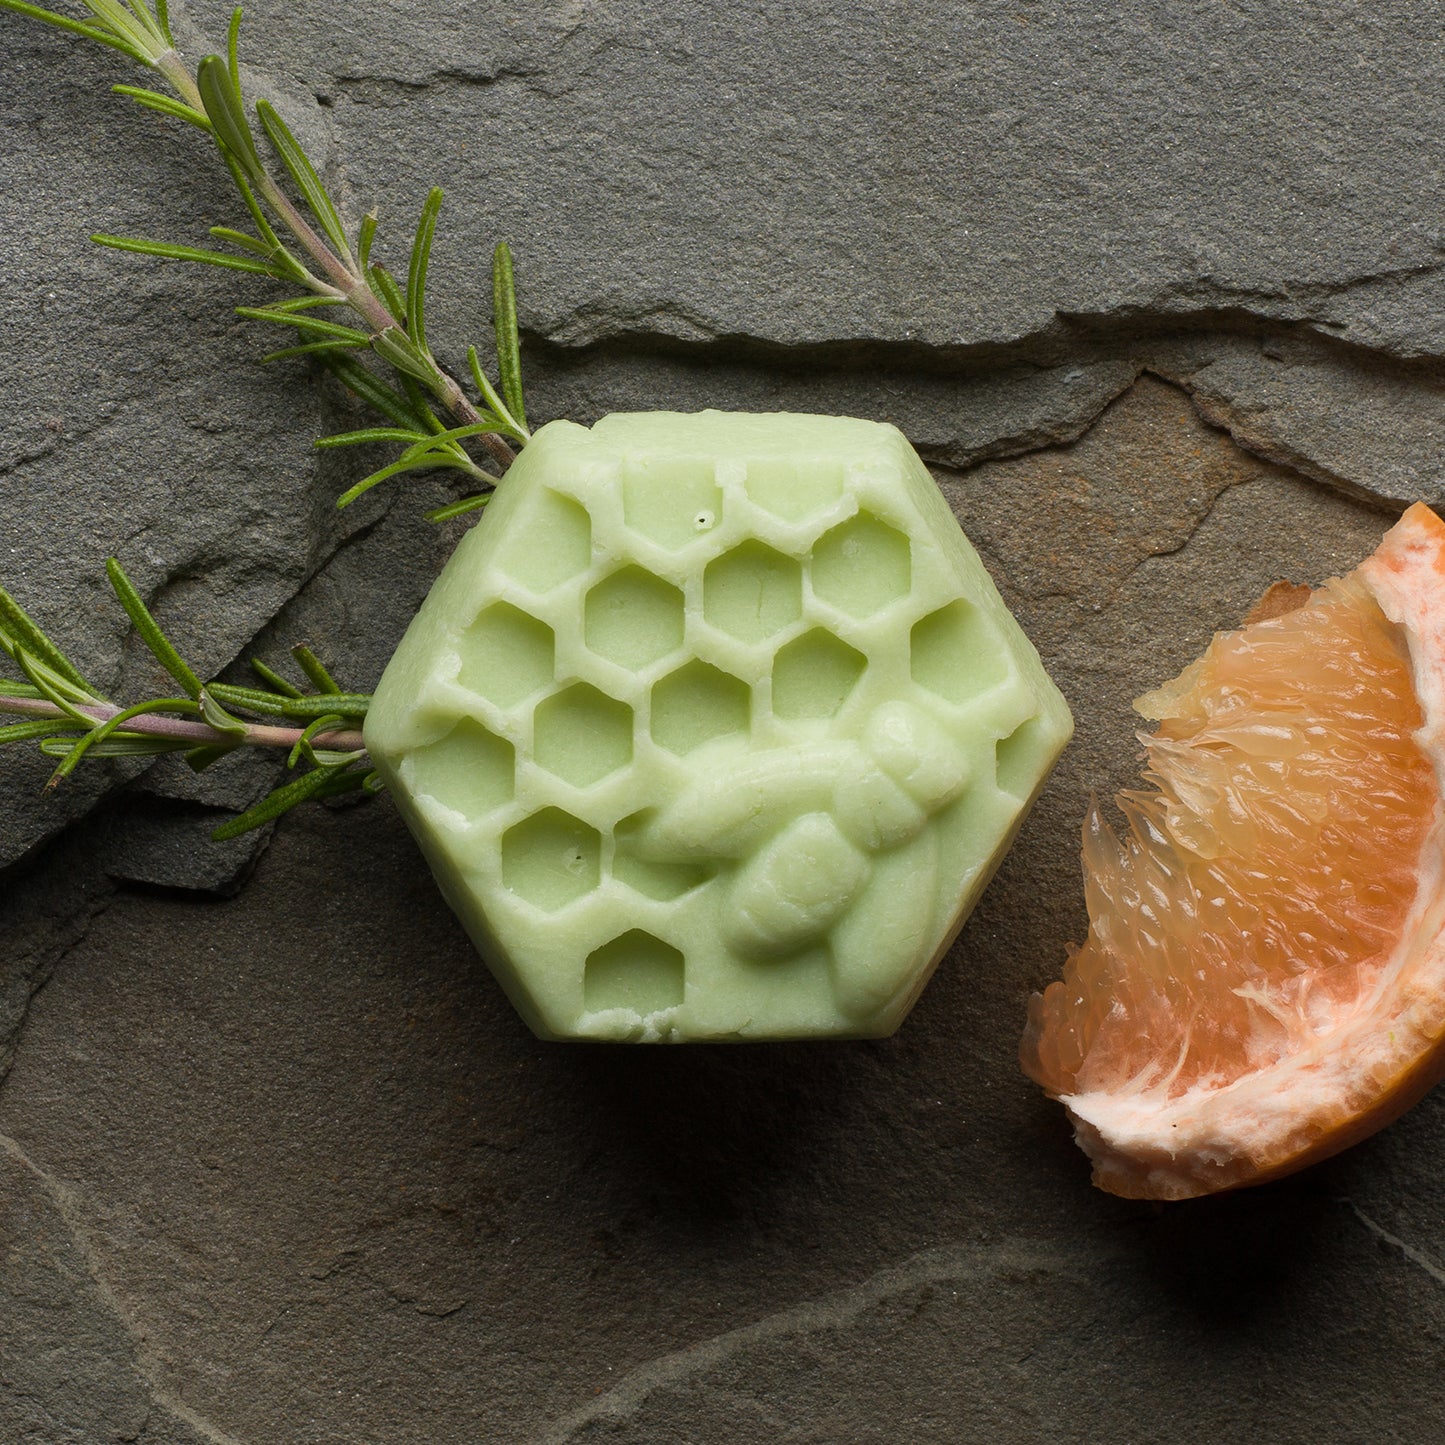 Hexagonal green bar with a honey bee and honeycomb on it. Next to it is a sprig of rosemary and a crescent of juicy grapefruit.